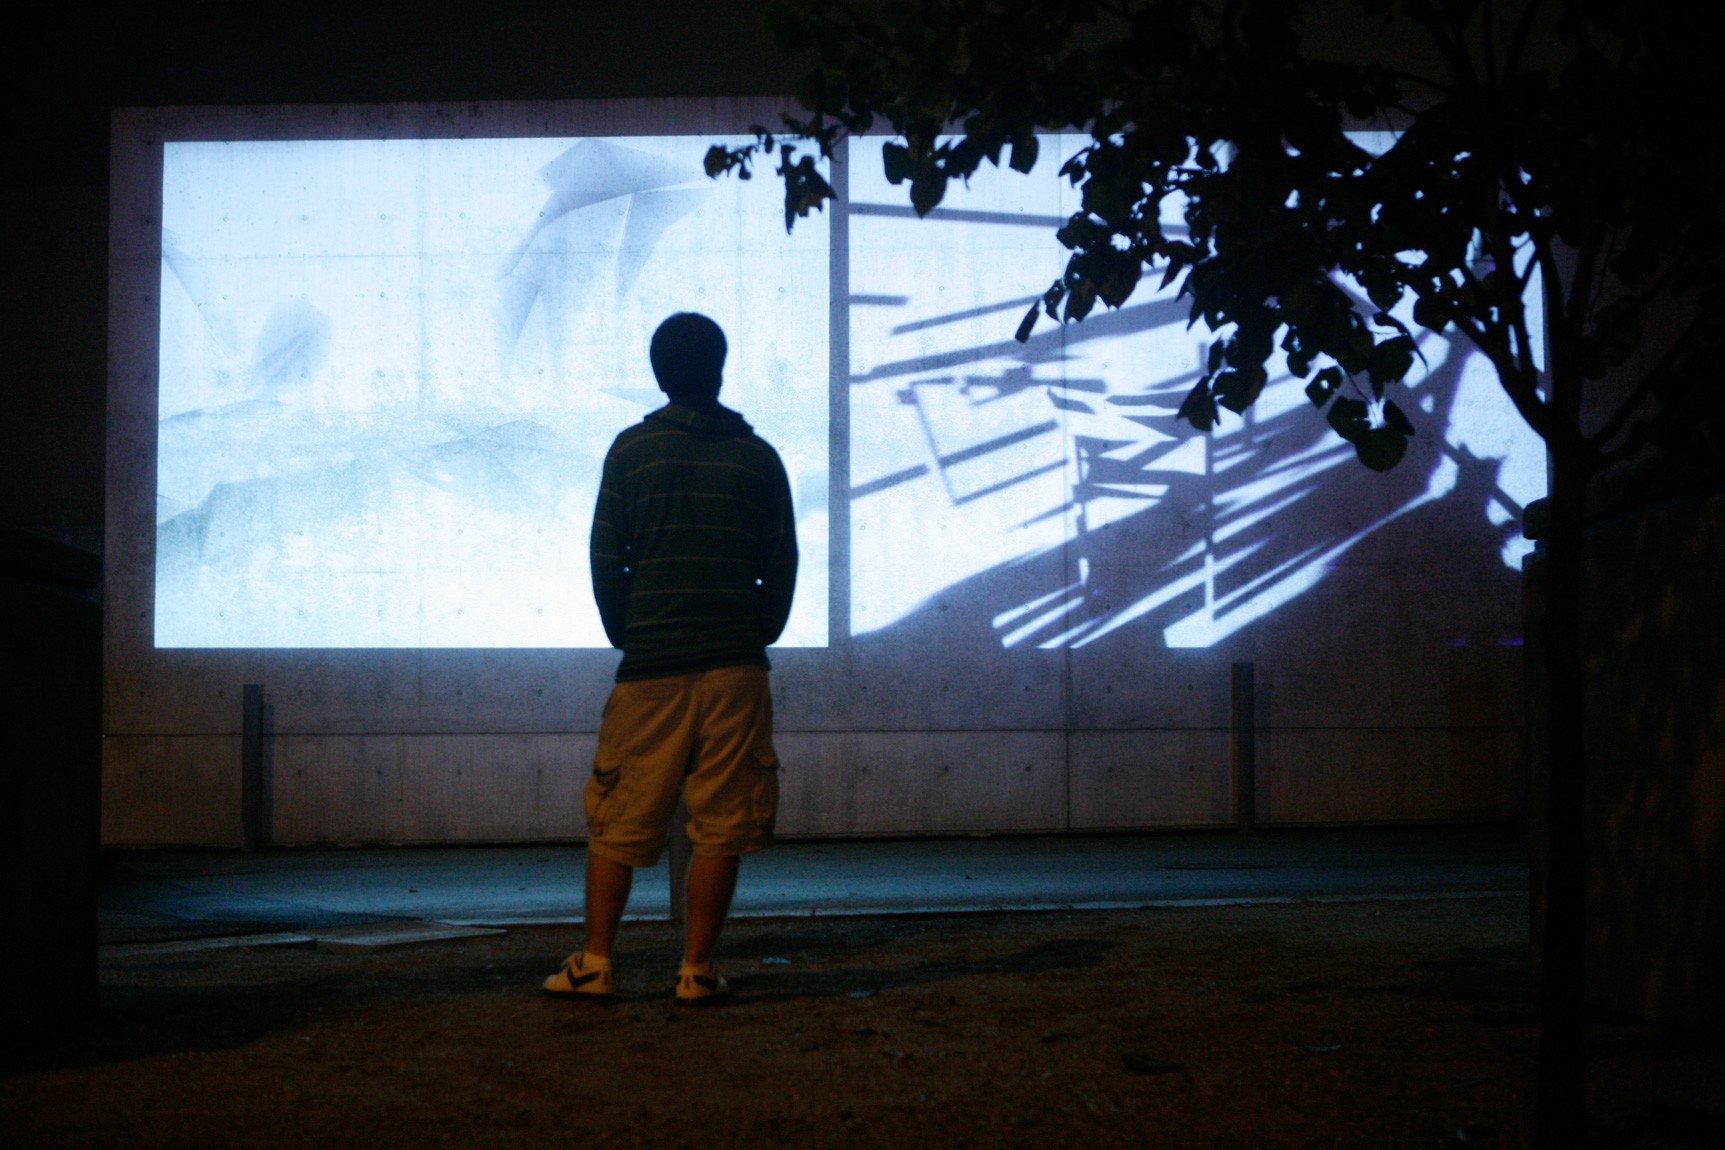 A visitor stands outside before Ann Lislegaard's film "Crystal World" projected on a concrete wall at night.